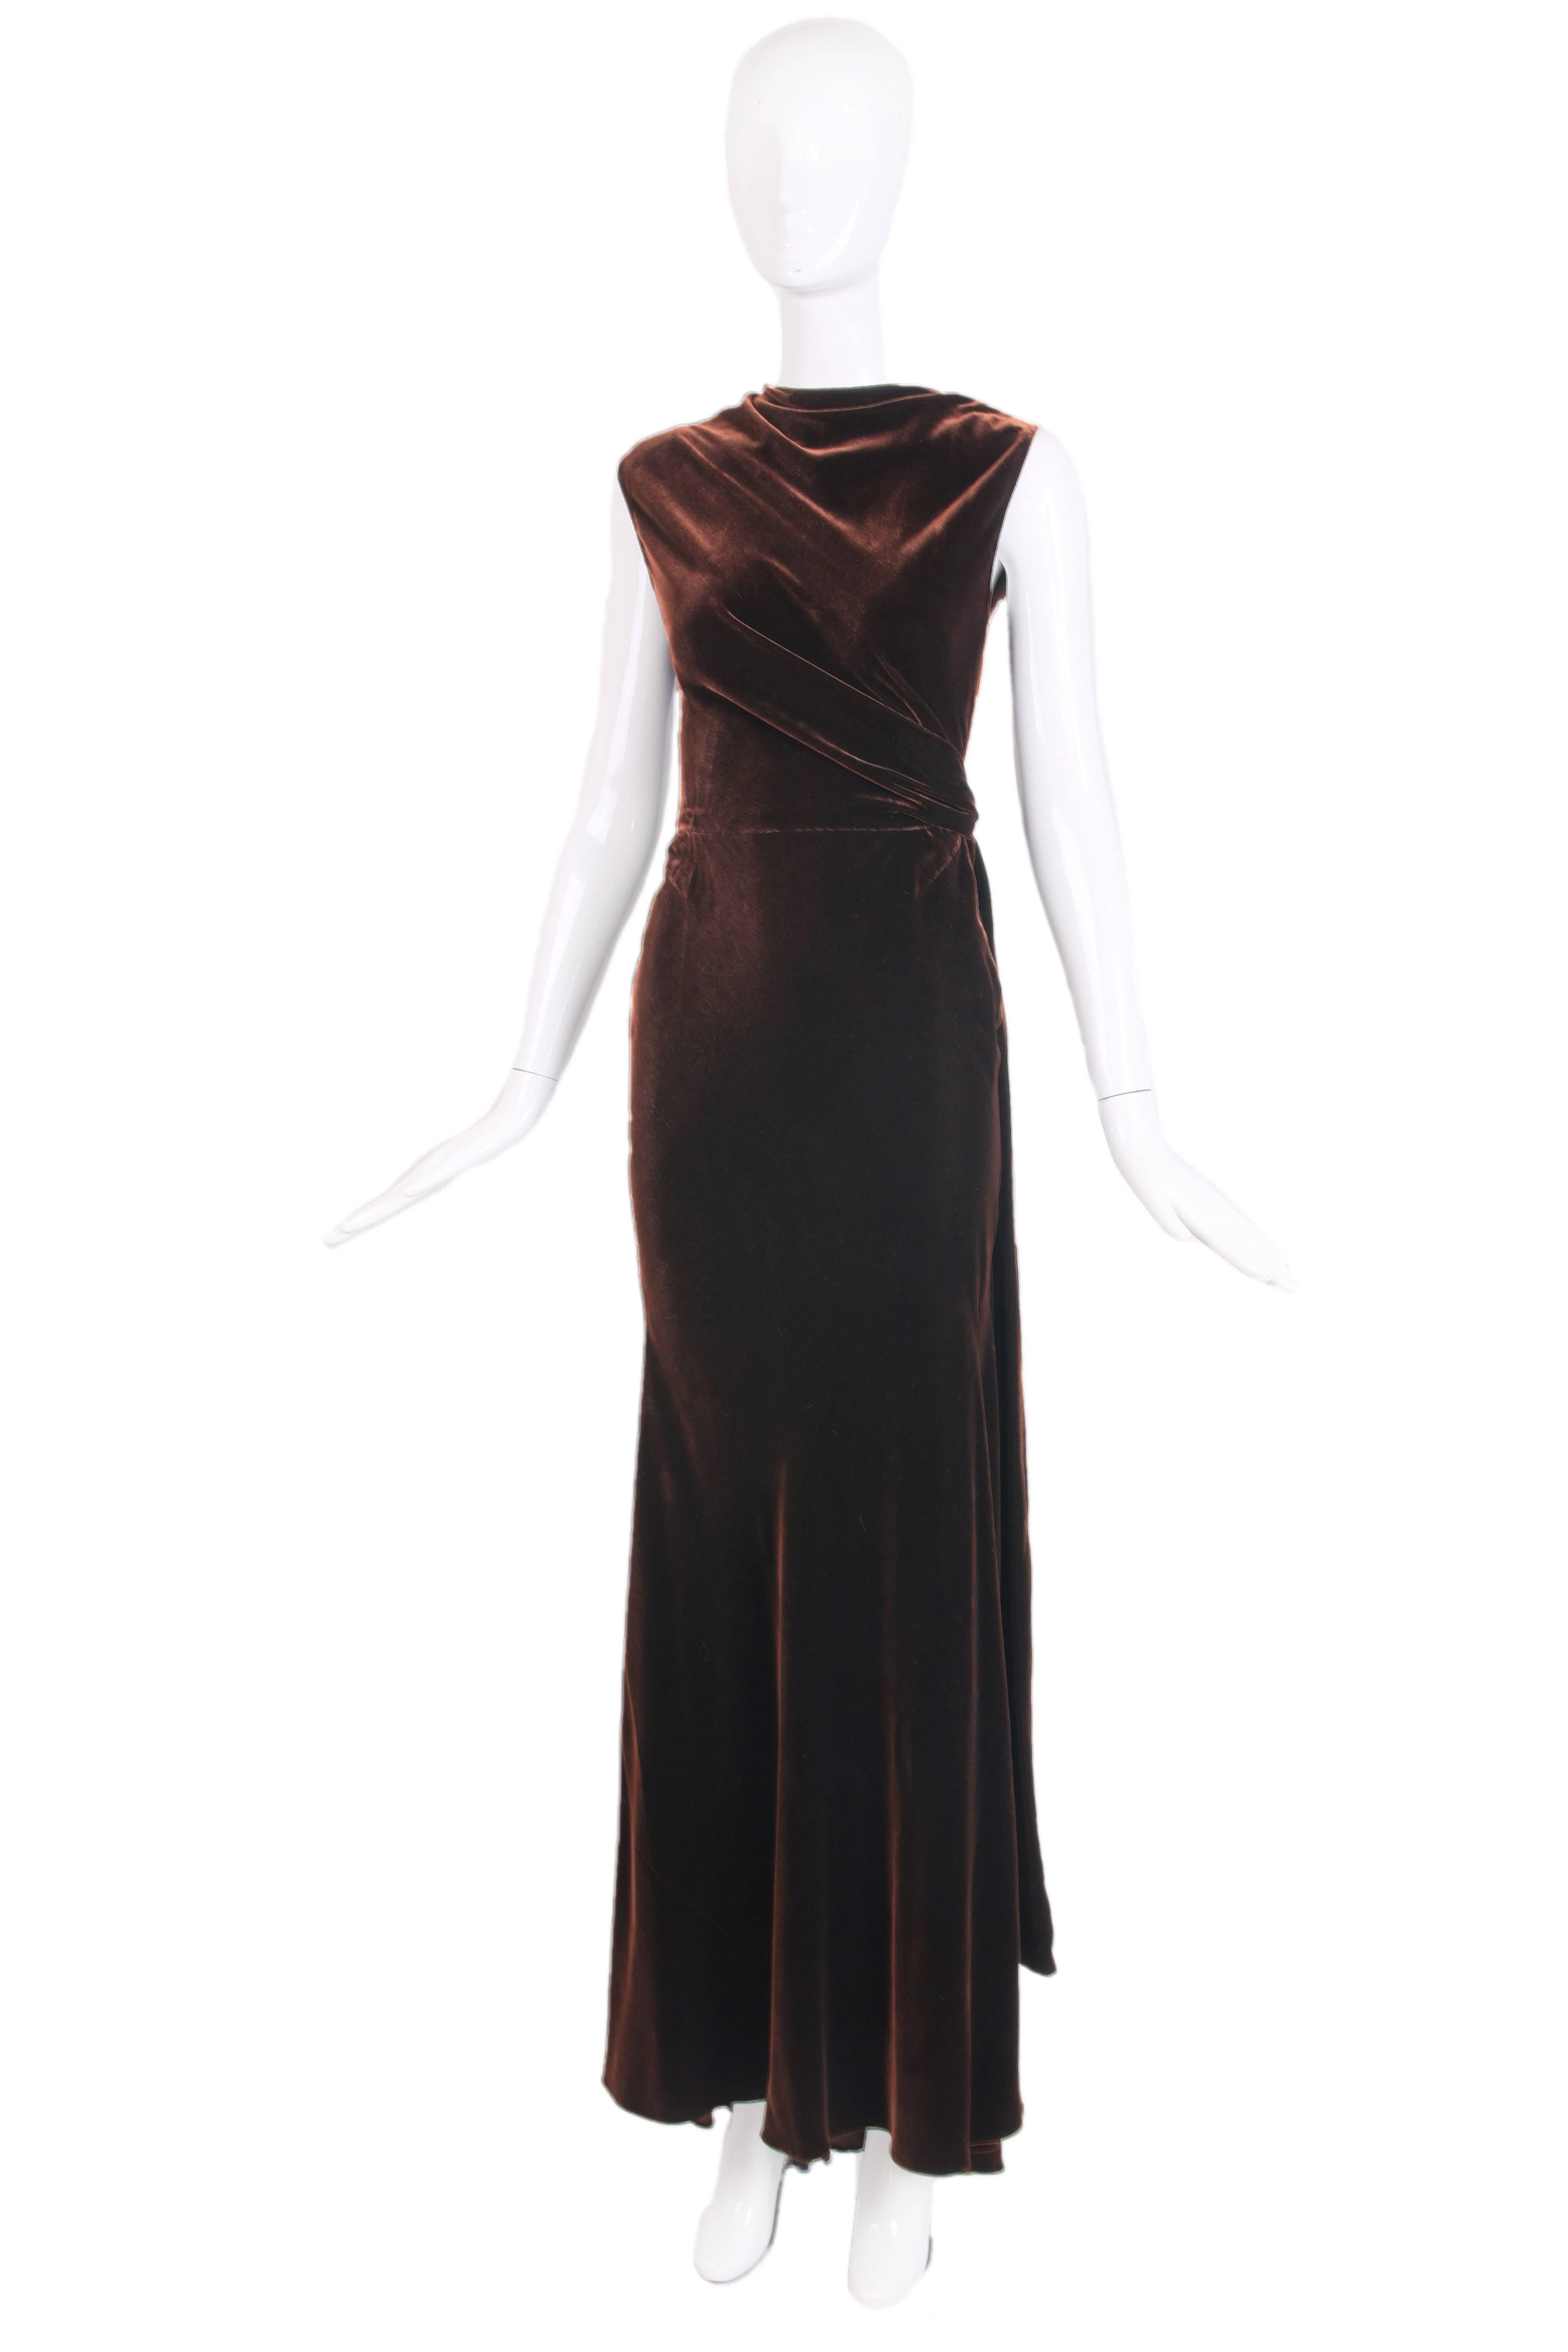 Circa 1990 Alaia couture evening gown cut in a draping grecian style. The color is a deep copper brown in a liquid silk velvet. There are classic Alaia seam detailing around hip and bottom area and a long side-tying sash that falls to the hem.